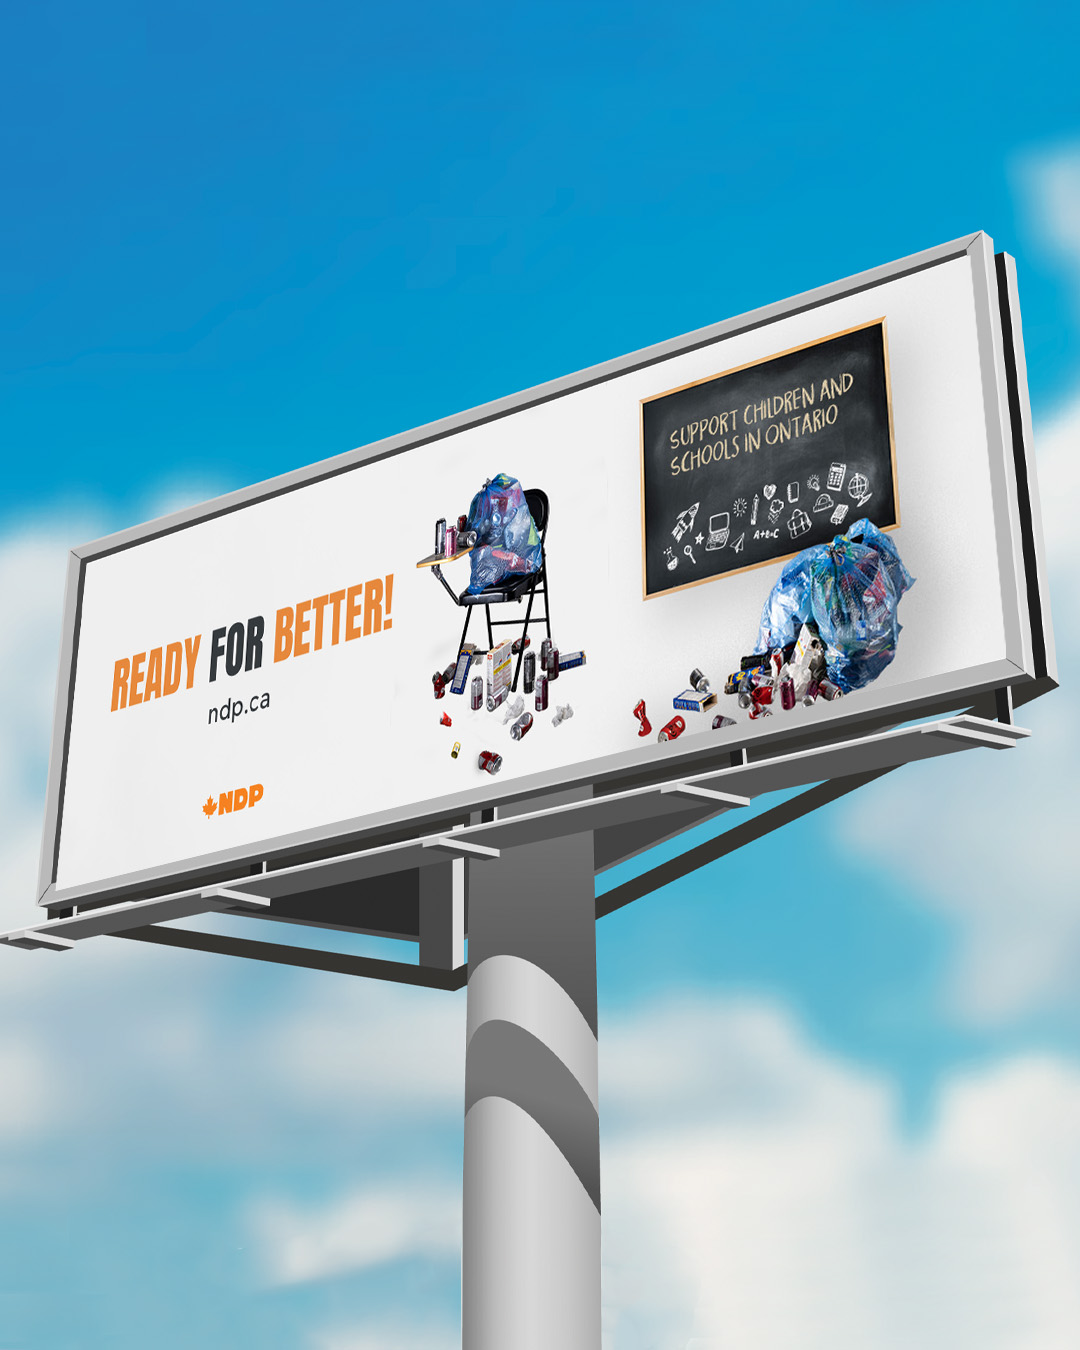 Ad Campaign_Ready for Better